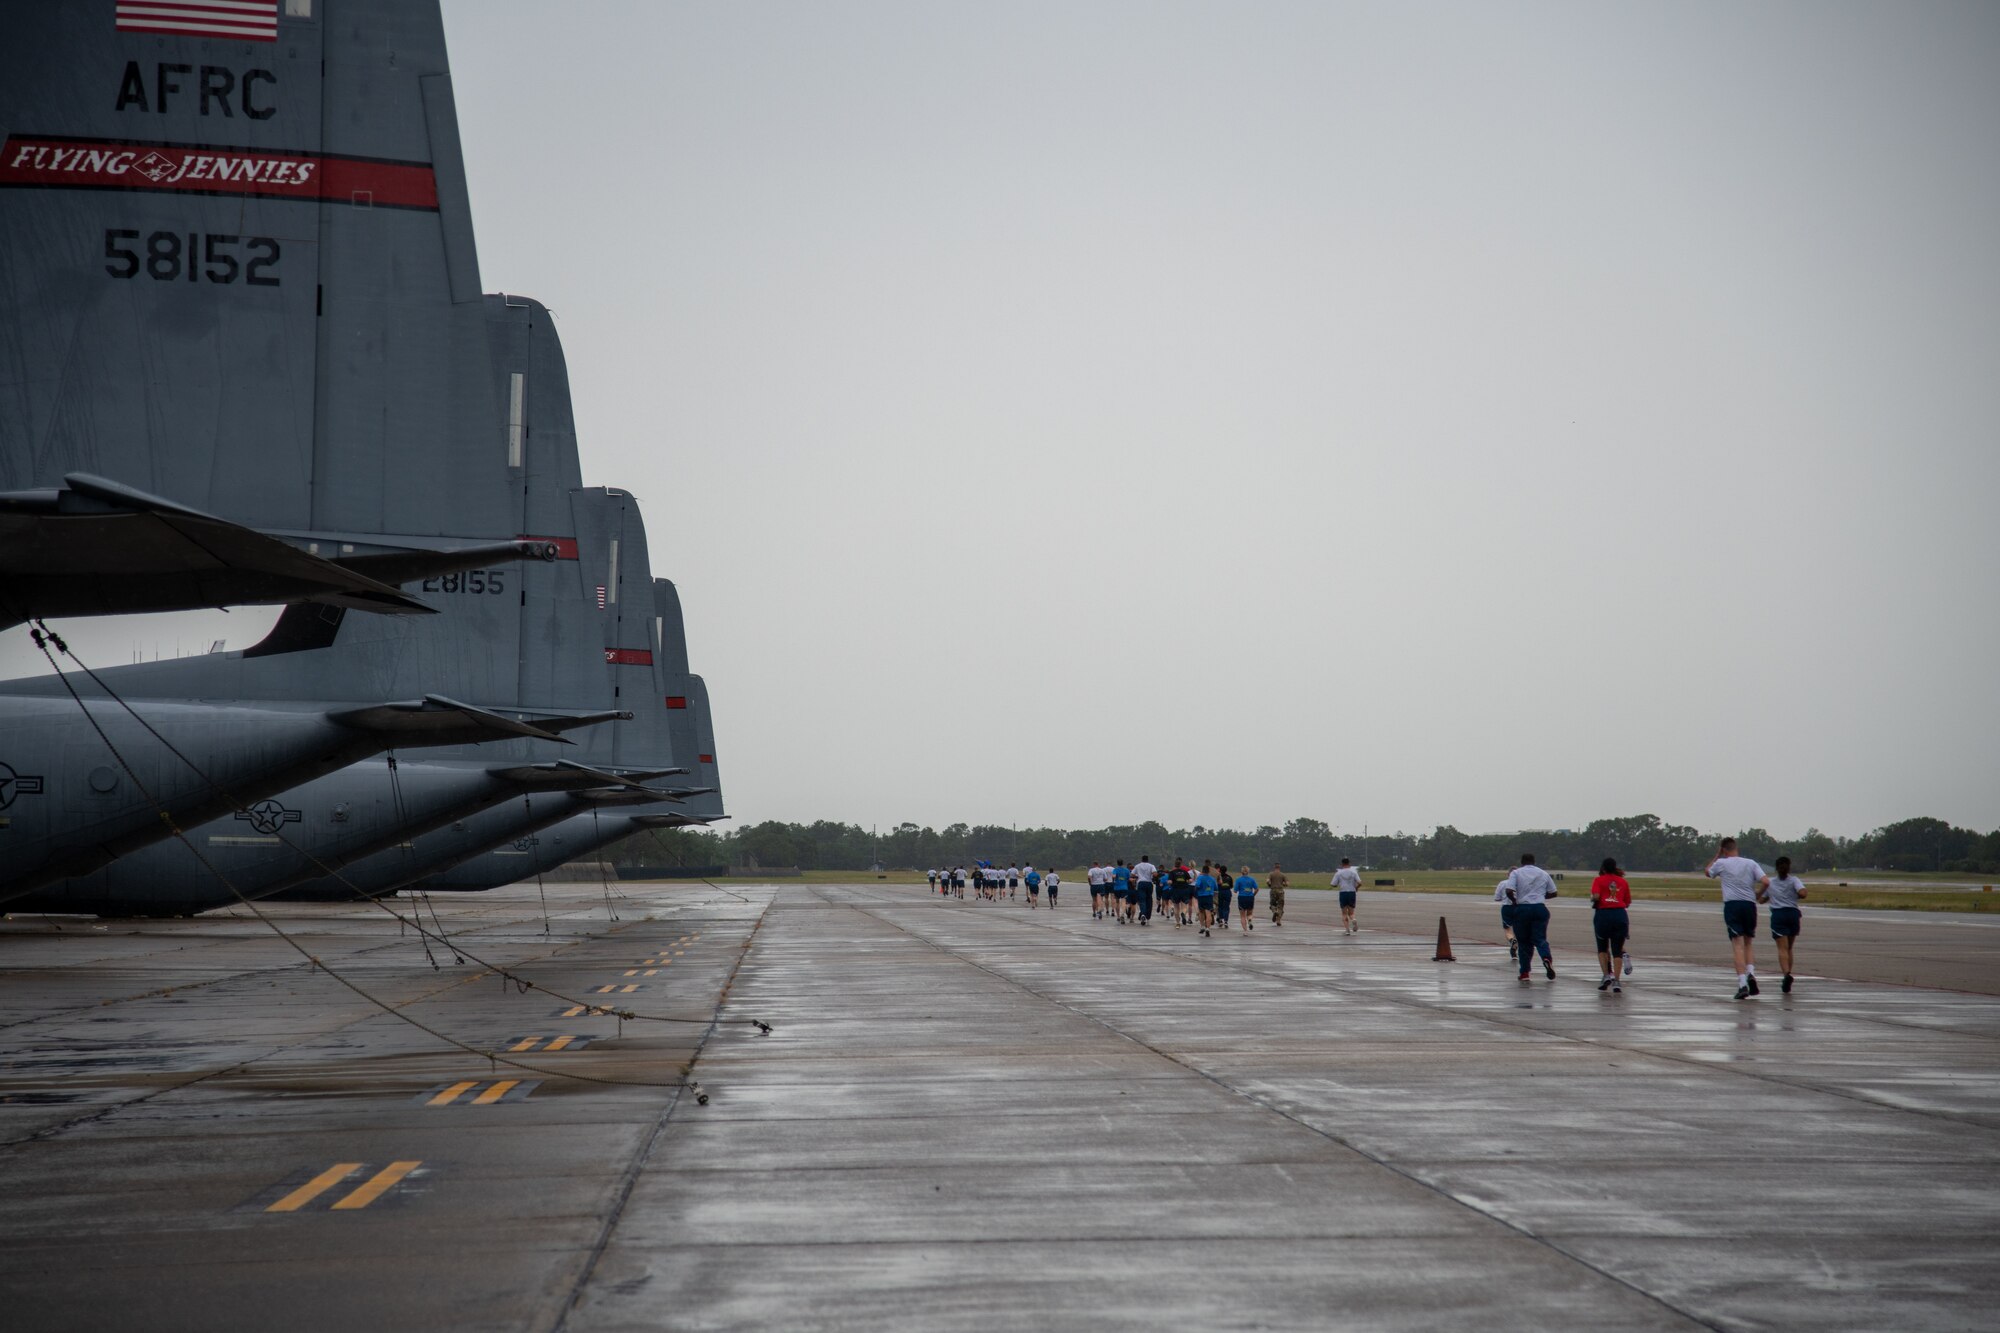 Members of the 41st Aerial Port Squadron at Keesler Air Force Base, Miss., participate in the “Port Dawg Memorial Run” on the Keesler flight line June 5, 2021. The event serves as a way for members to pay tribute to lives lost in the career-field across the entire Air Force. (U.S. Air Force Photo by Staff Sgt. Kristen Pittman)